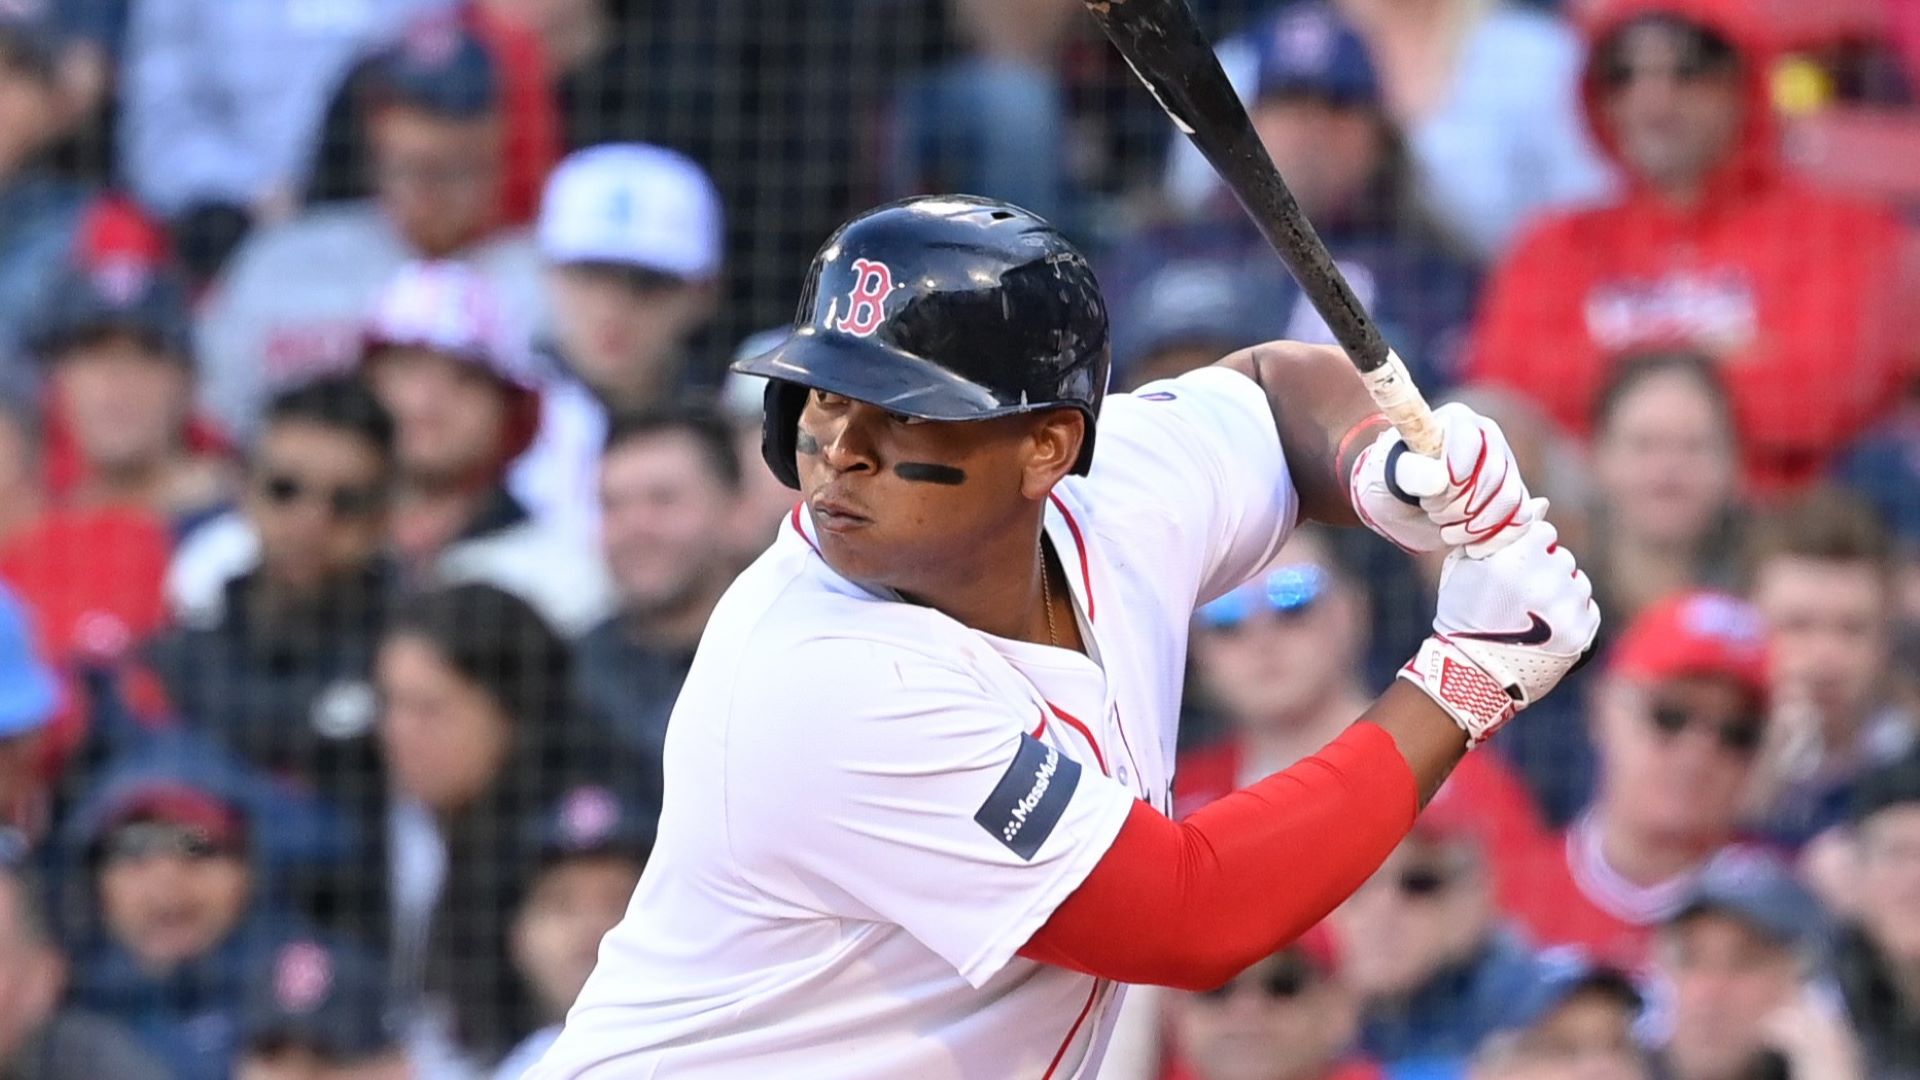 Red Sox’s Rafael Devers Taking Time With Bone Bruise On Knee